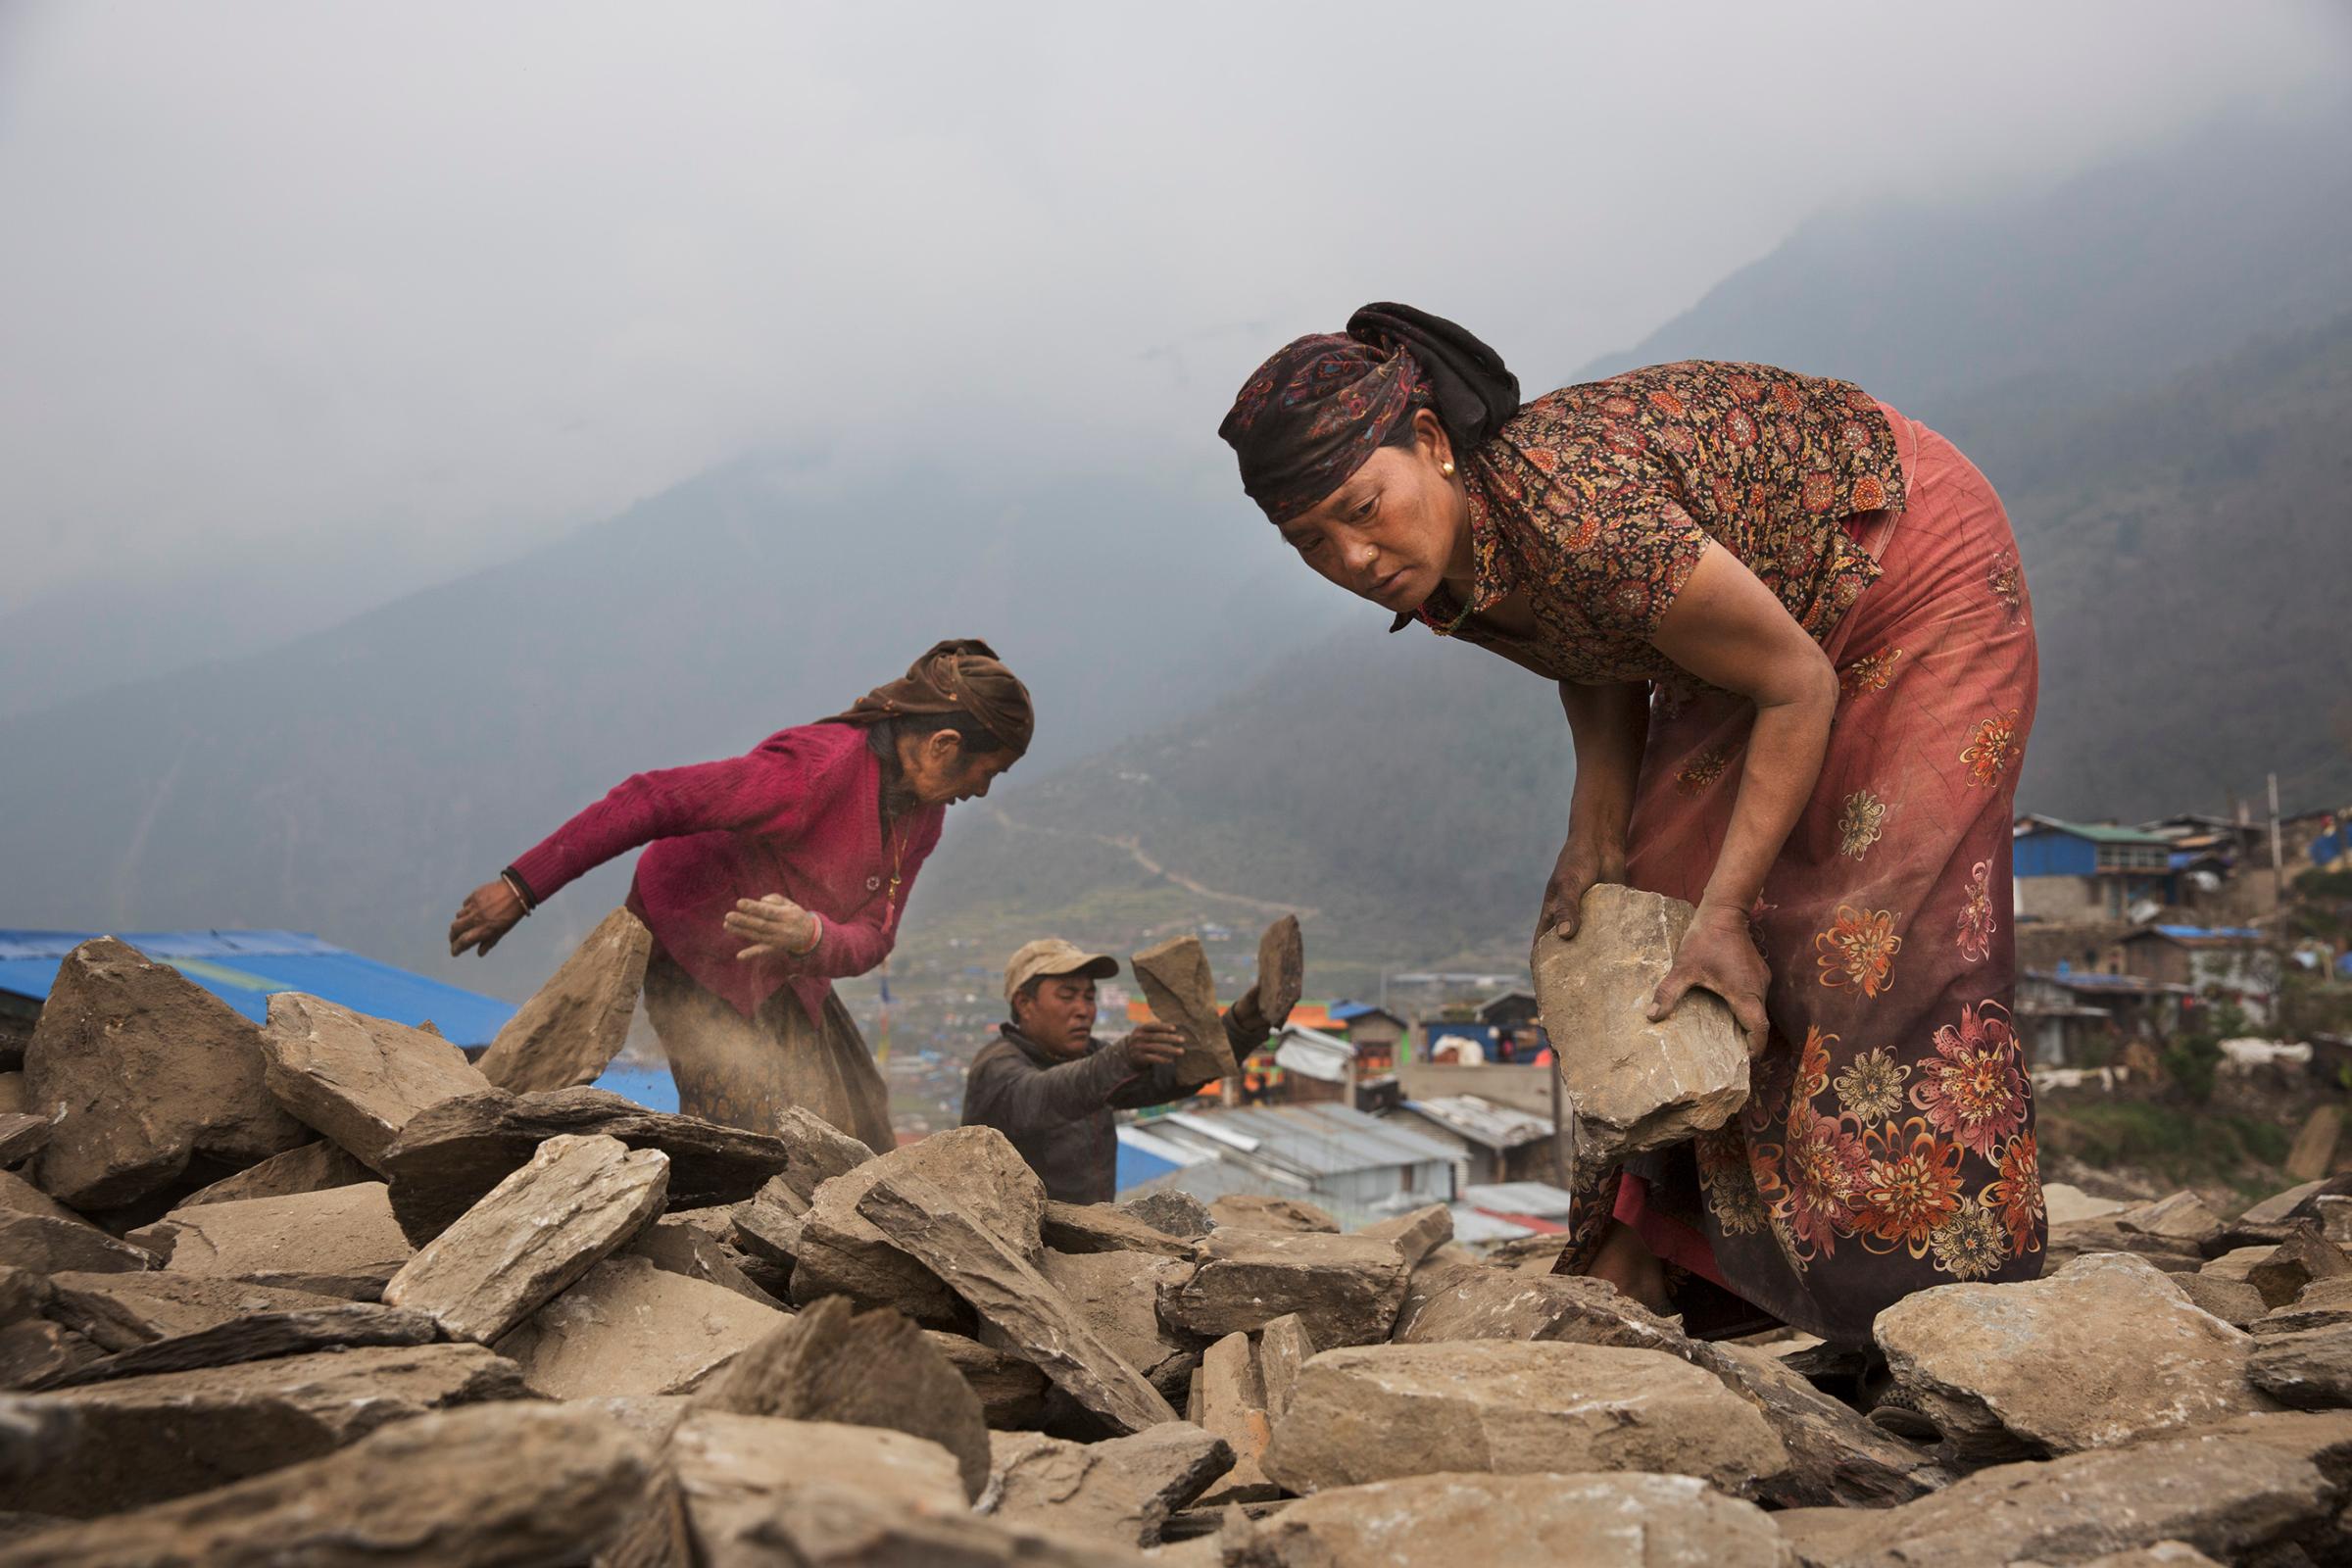 The village of Barpak, in Gorkha district, close to the epicenter of the earthquake, which destroyed almost the entire village. Villagers rebuilding houses and pathways and building a new religious stupa. Much of the work is accomplished communally.by James Nachtwey